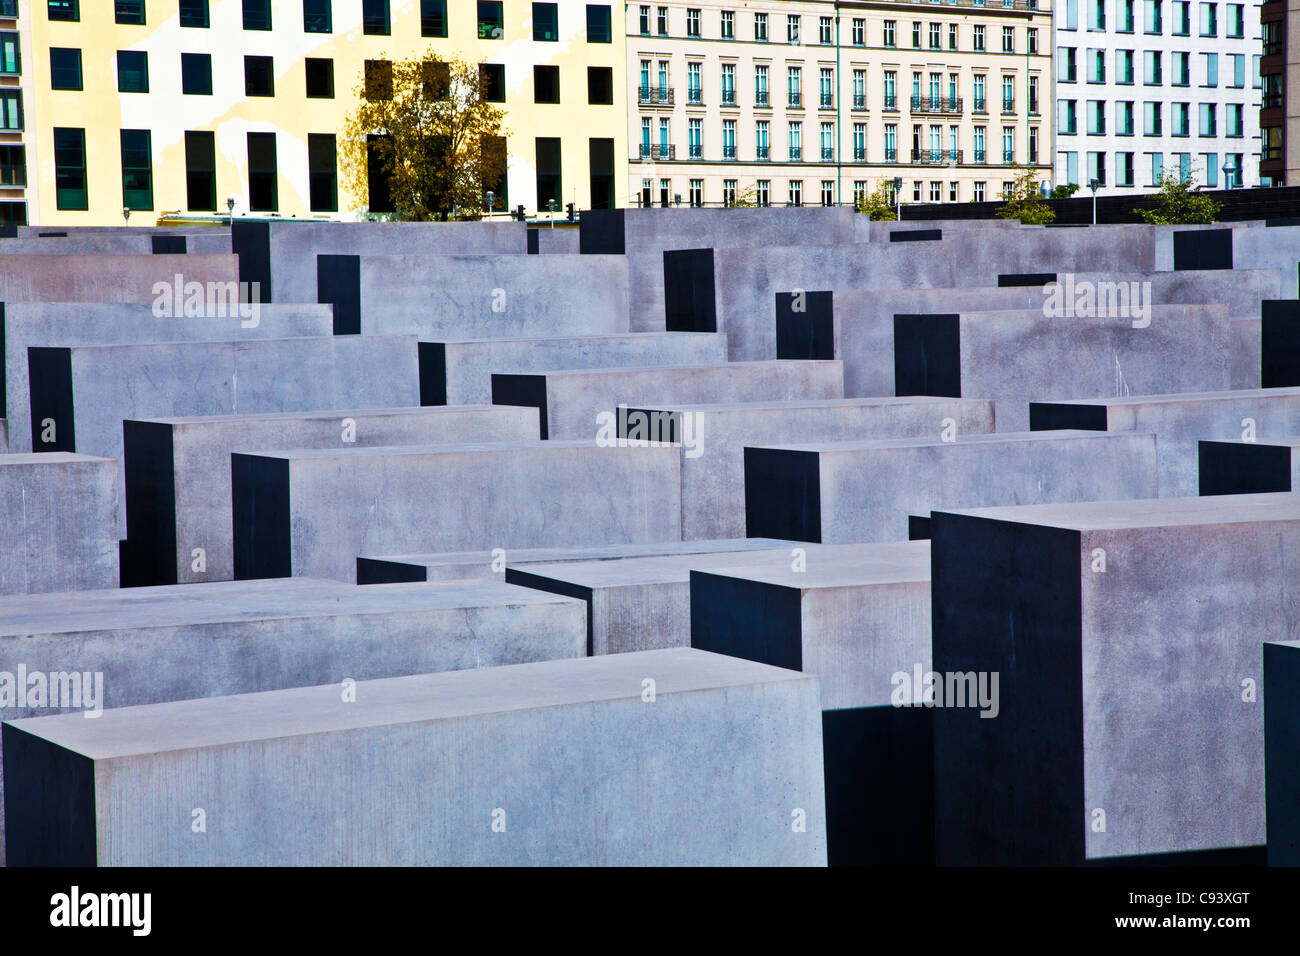 Memorial to the Murdered Jews of Europe or Holocaust Memorial designed by Peter Eisenman and Buro Happold in Berlin, Germany Stock Photo